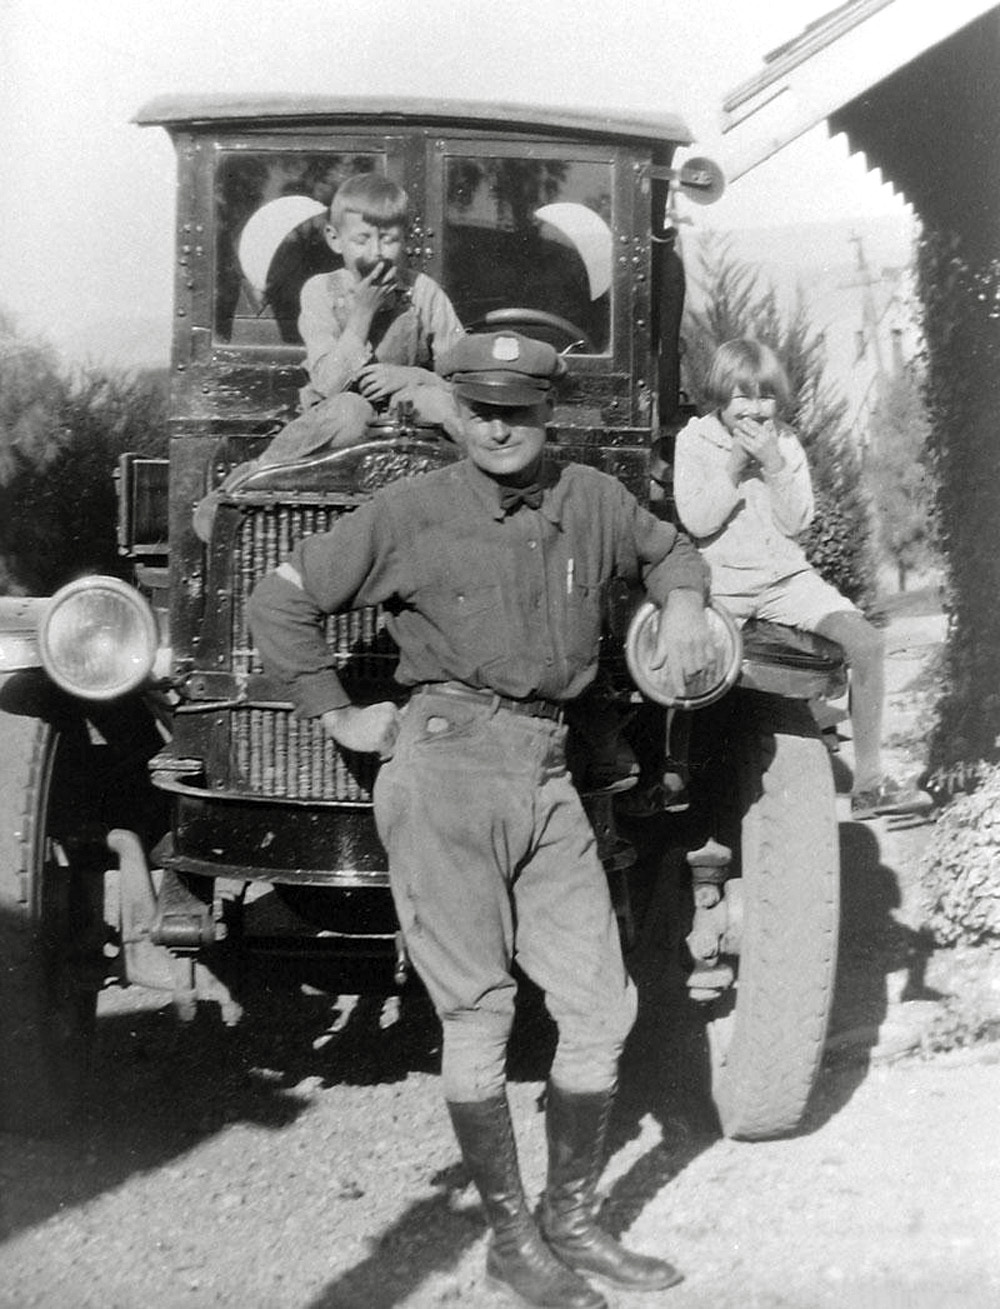 My grandfather W.W. Skinner was the first to acquire a balloon tire gas and oil delivery truck in San Luis Obispo, California. My father Don and aunt Margaret are on board. I like grandpa's tie, worn trousers and boots. Circa 1926. View full size.